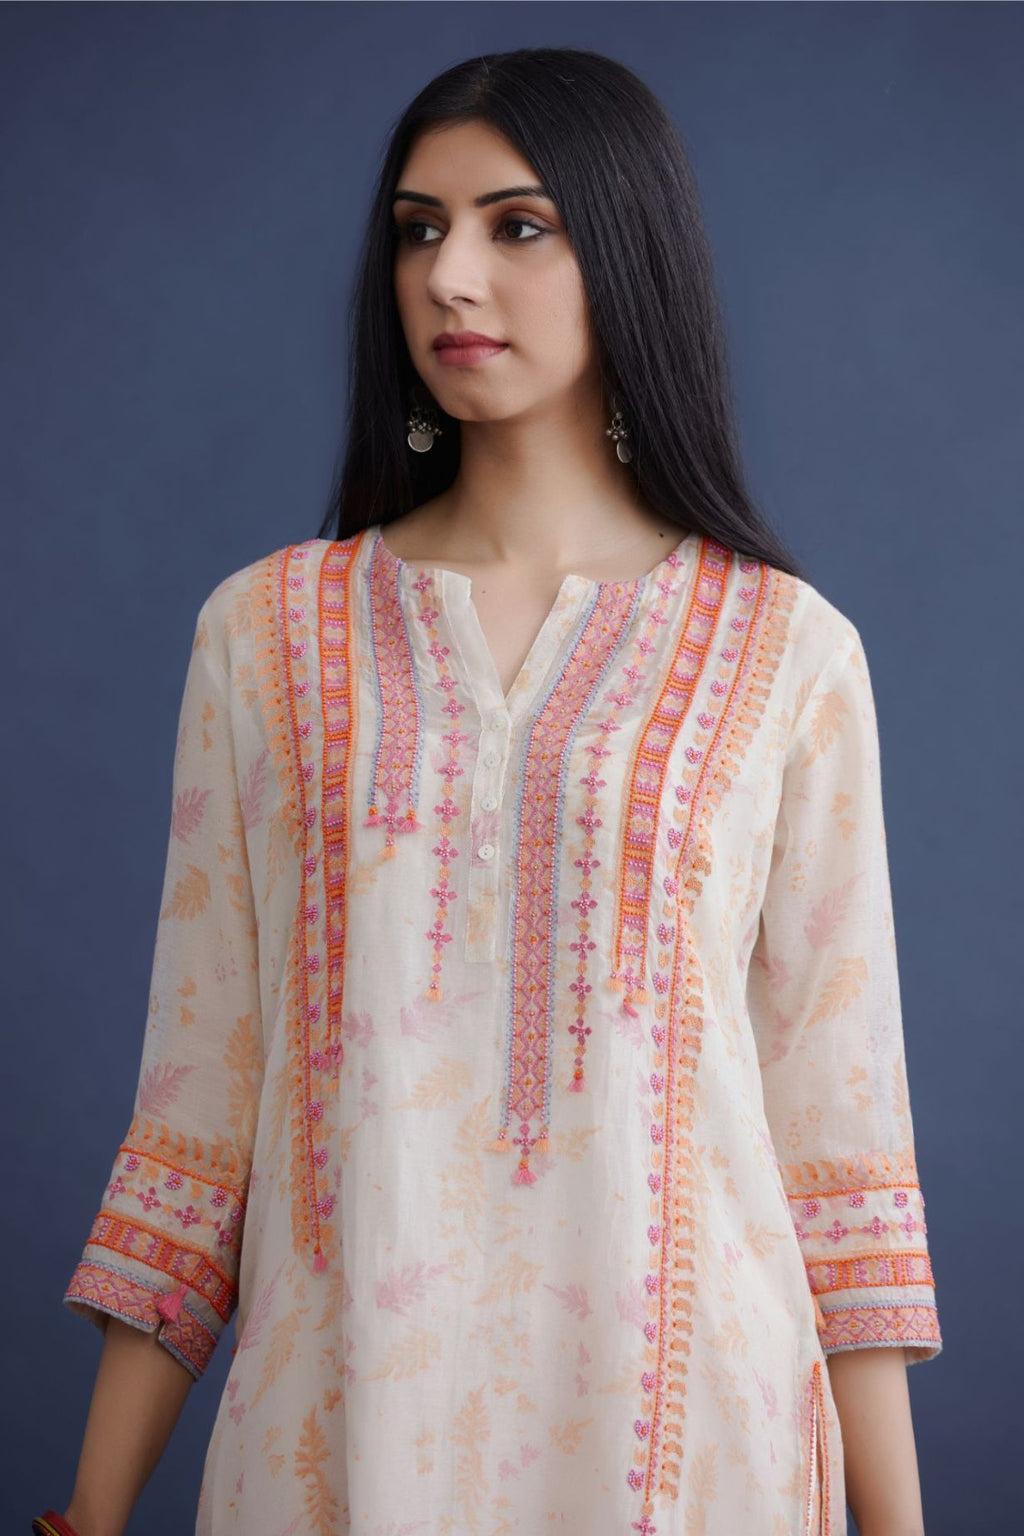 Off white hand block printed short kurta set, highlighted with delicate bead and thread embroidery